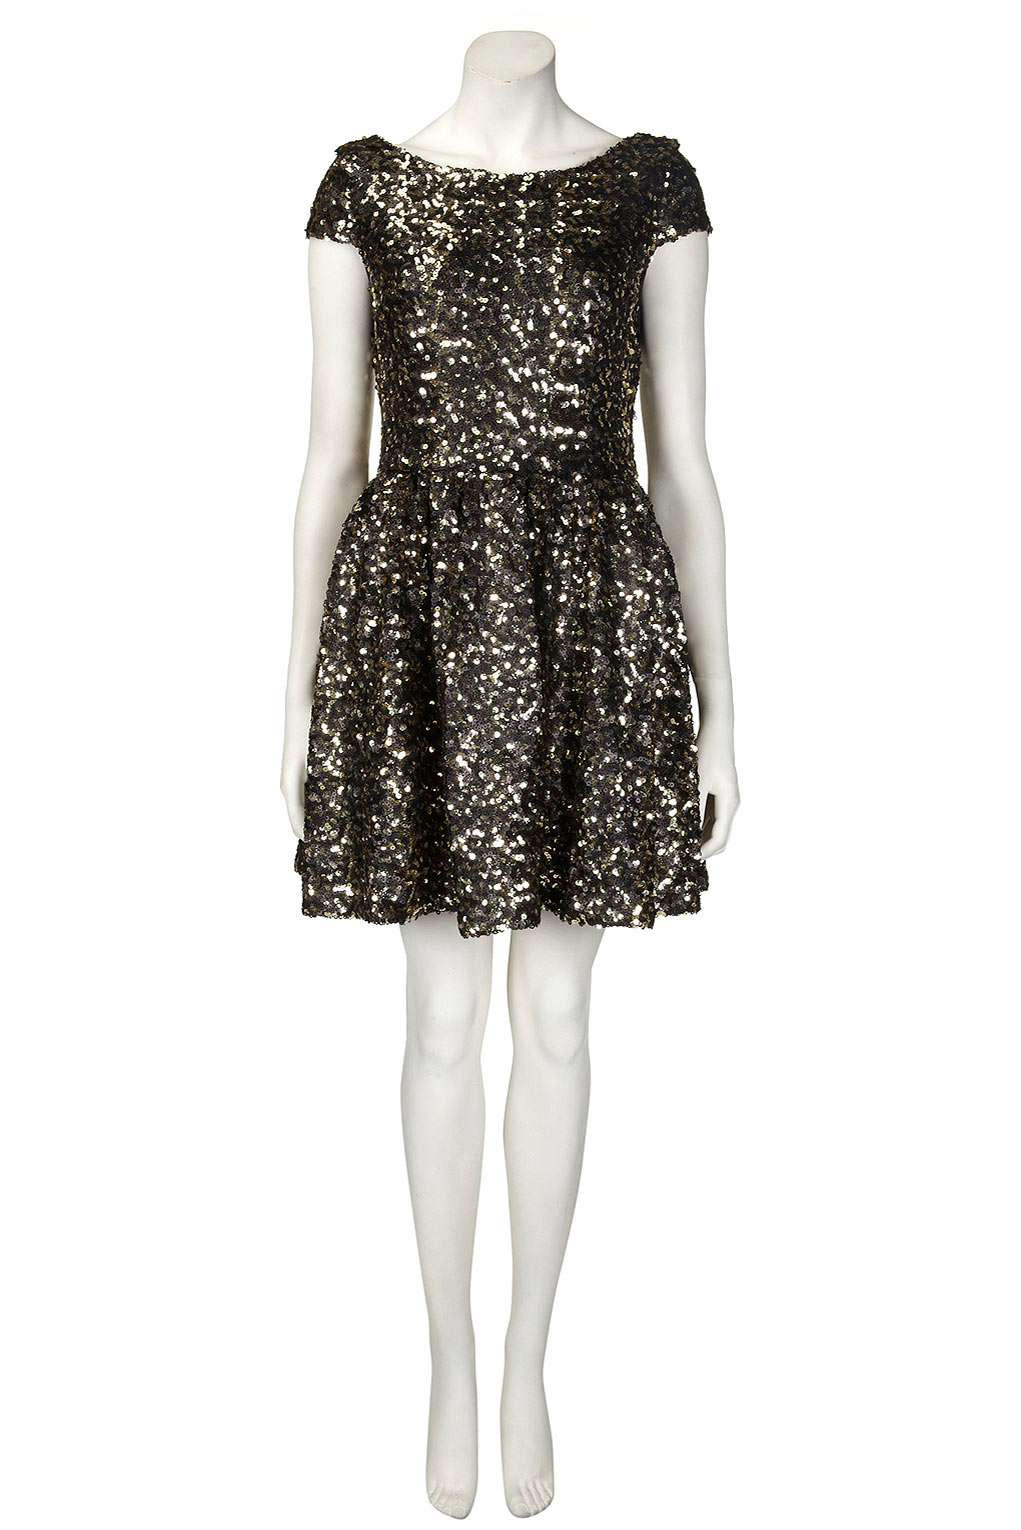 TOPSHOP Gold Cluster Sequin Prom Dress By Dress Up in Black - Lyst